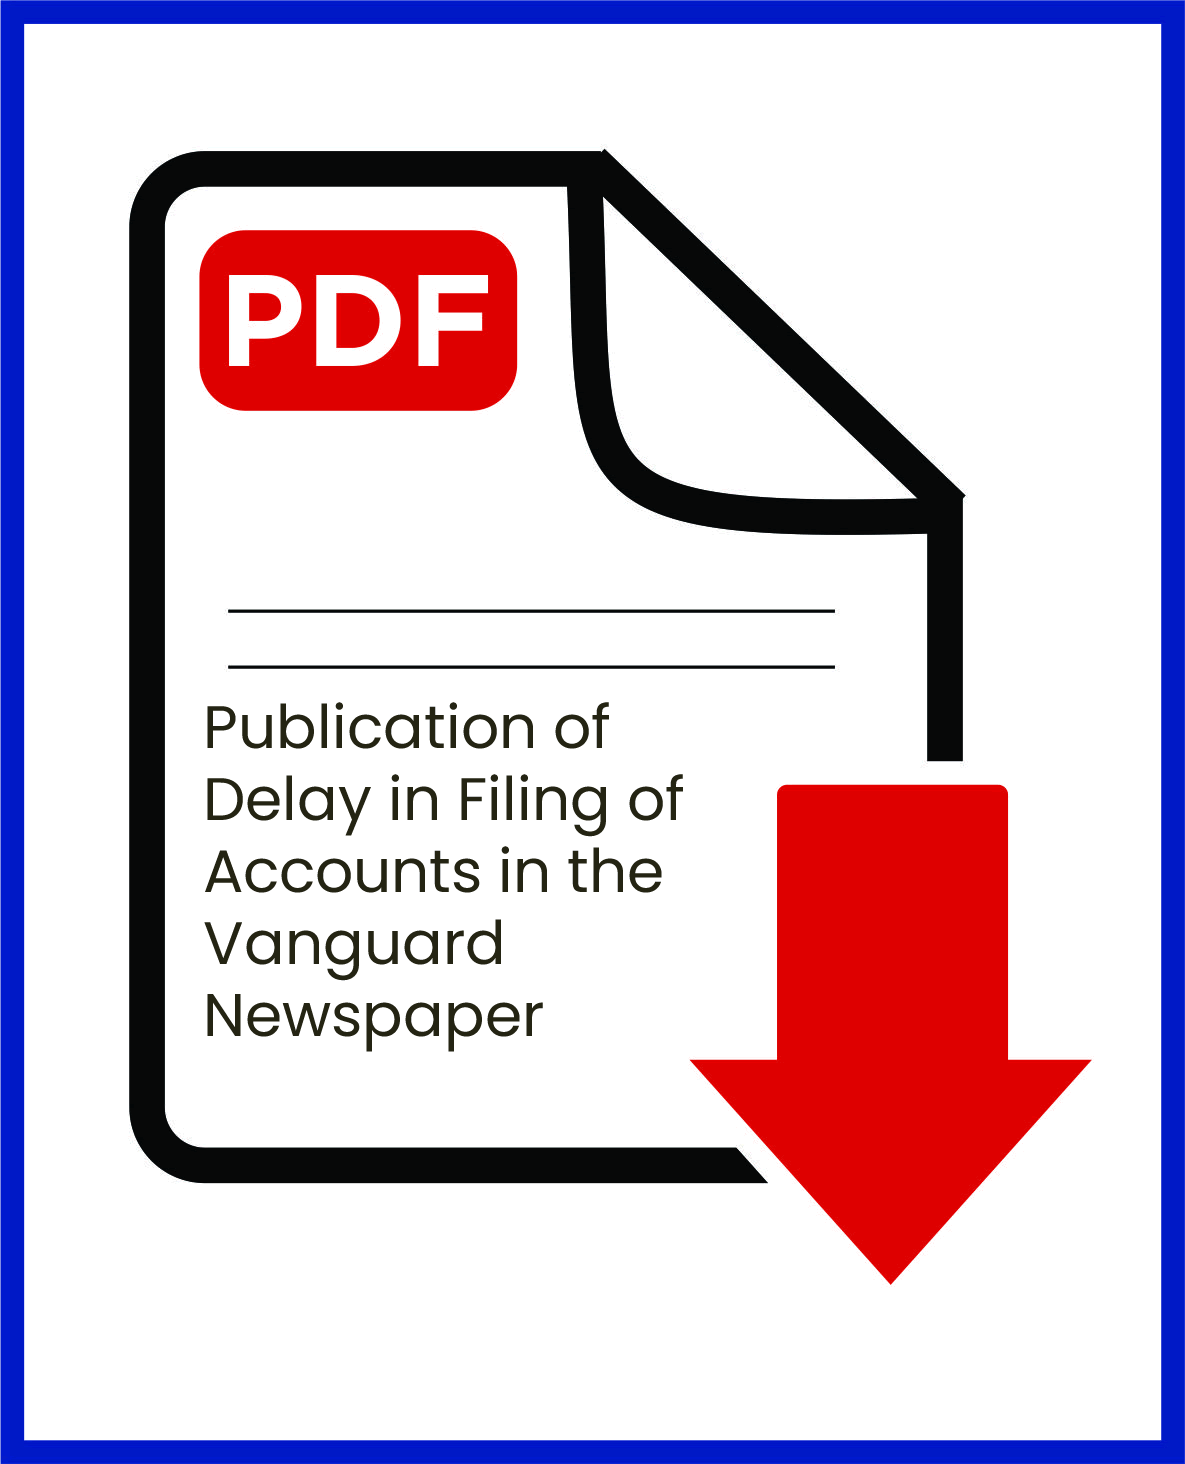 Publication of Delay in Filing of Accounts in the Vanguard Newspaper